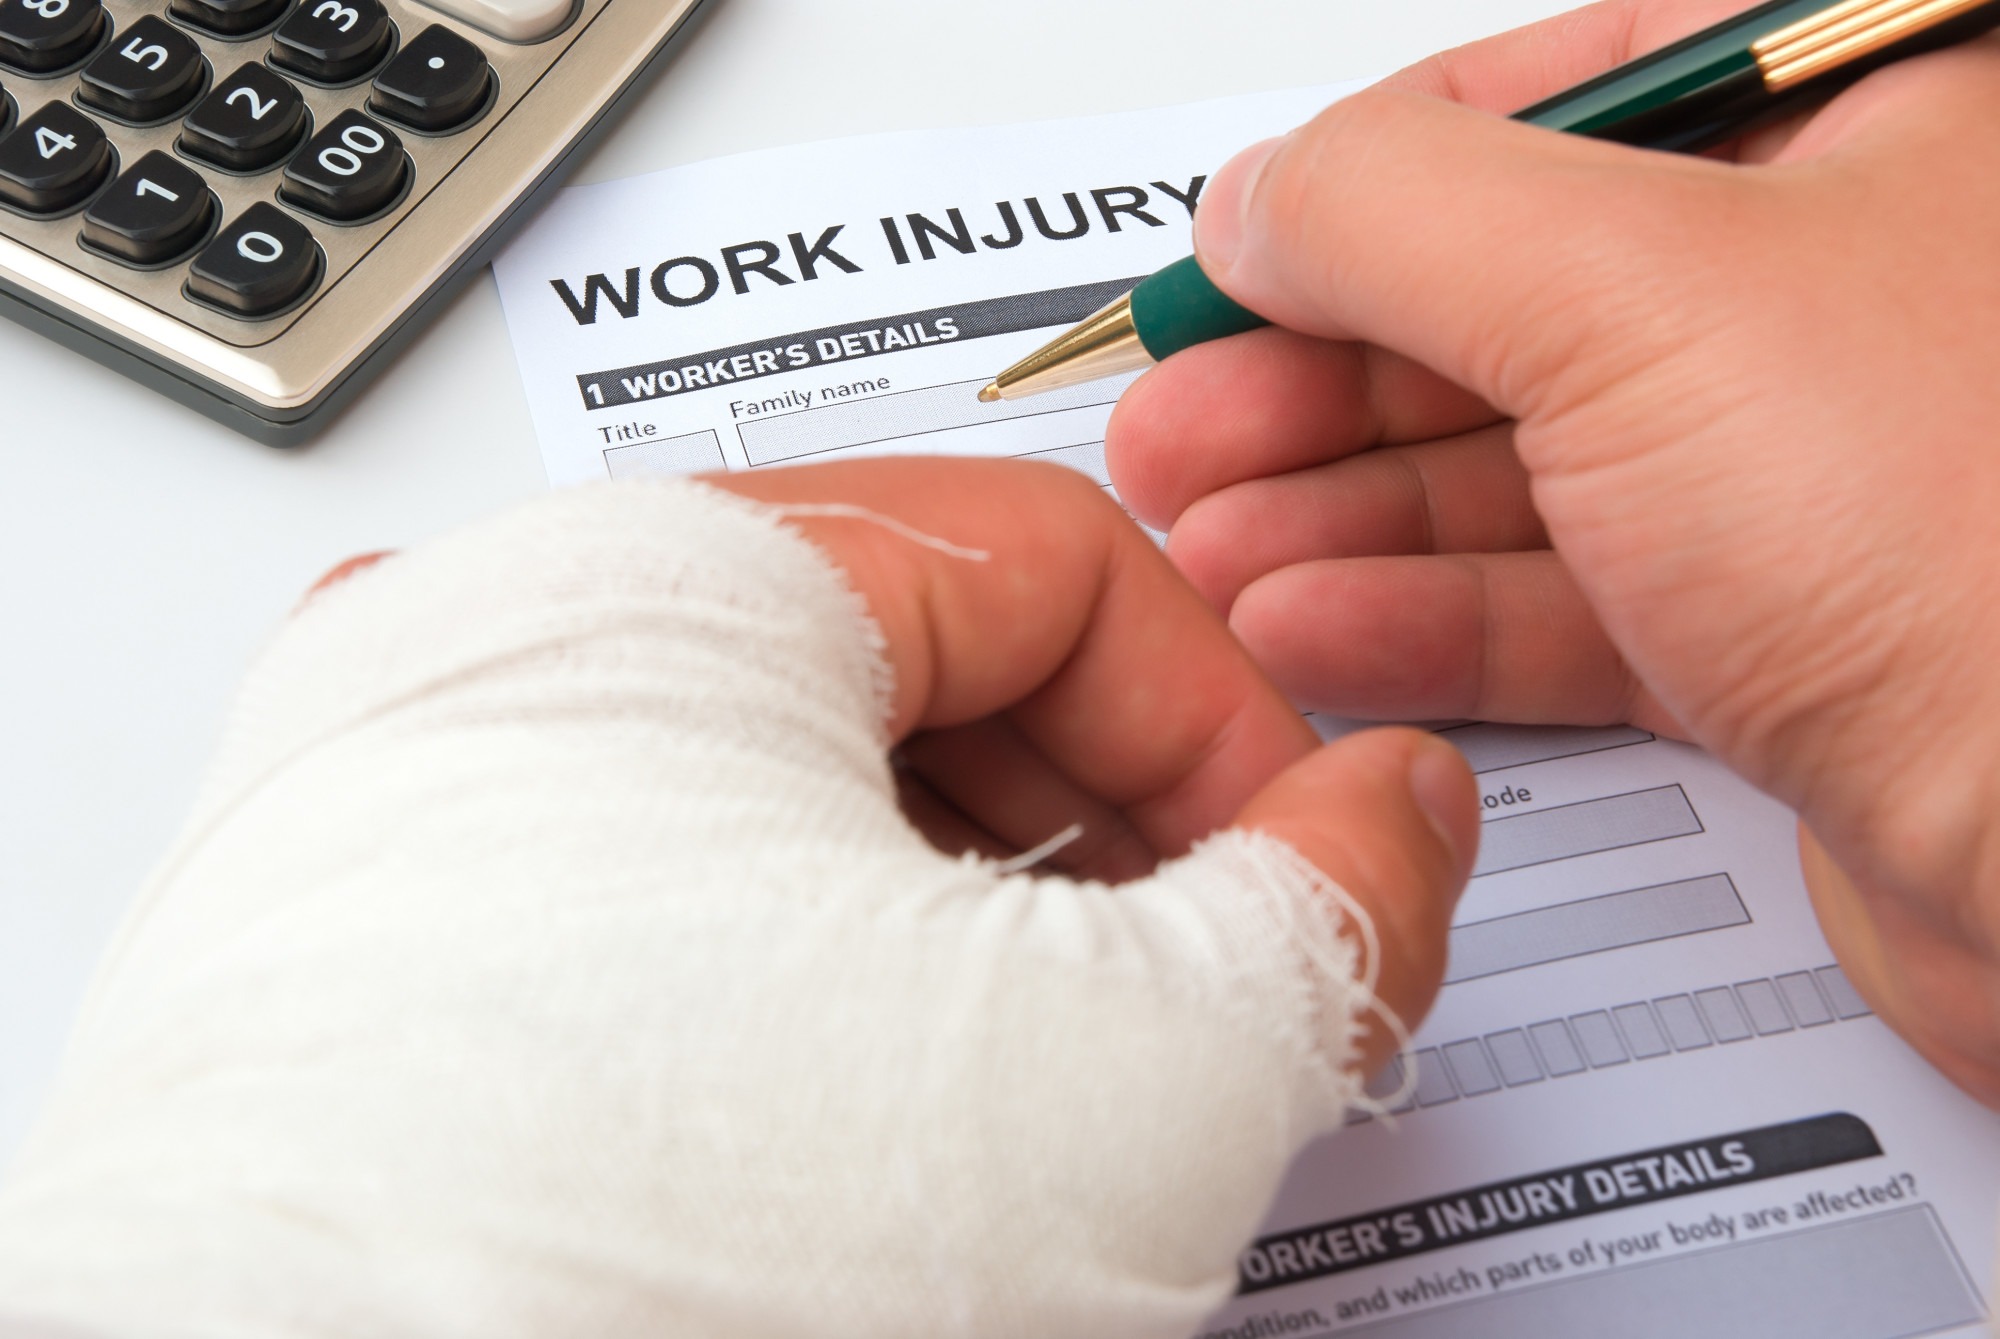 What to Do If You Suffer a Work Injury